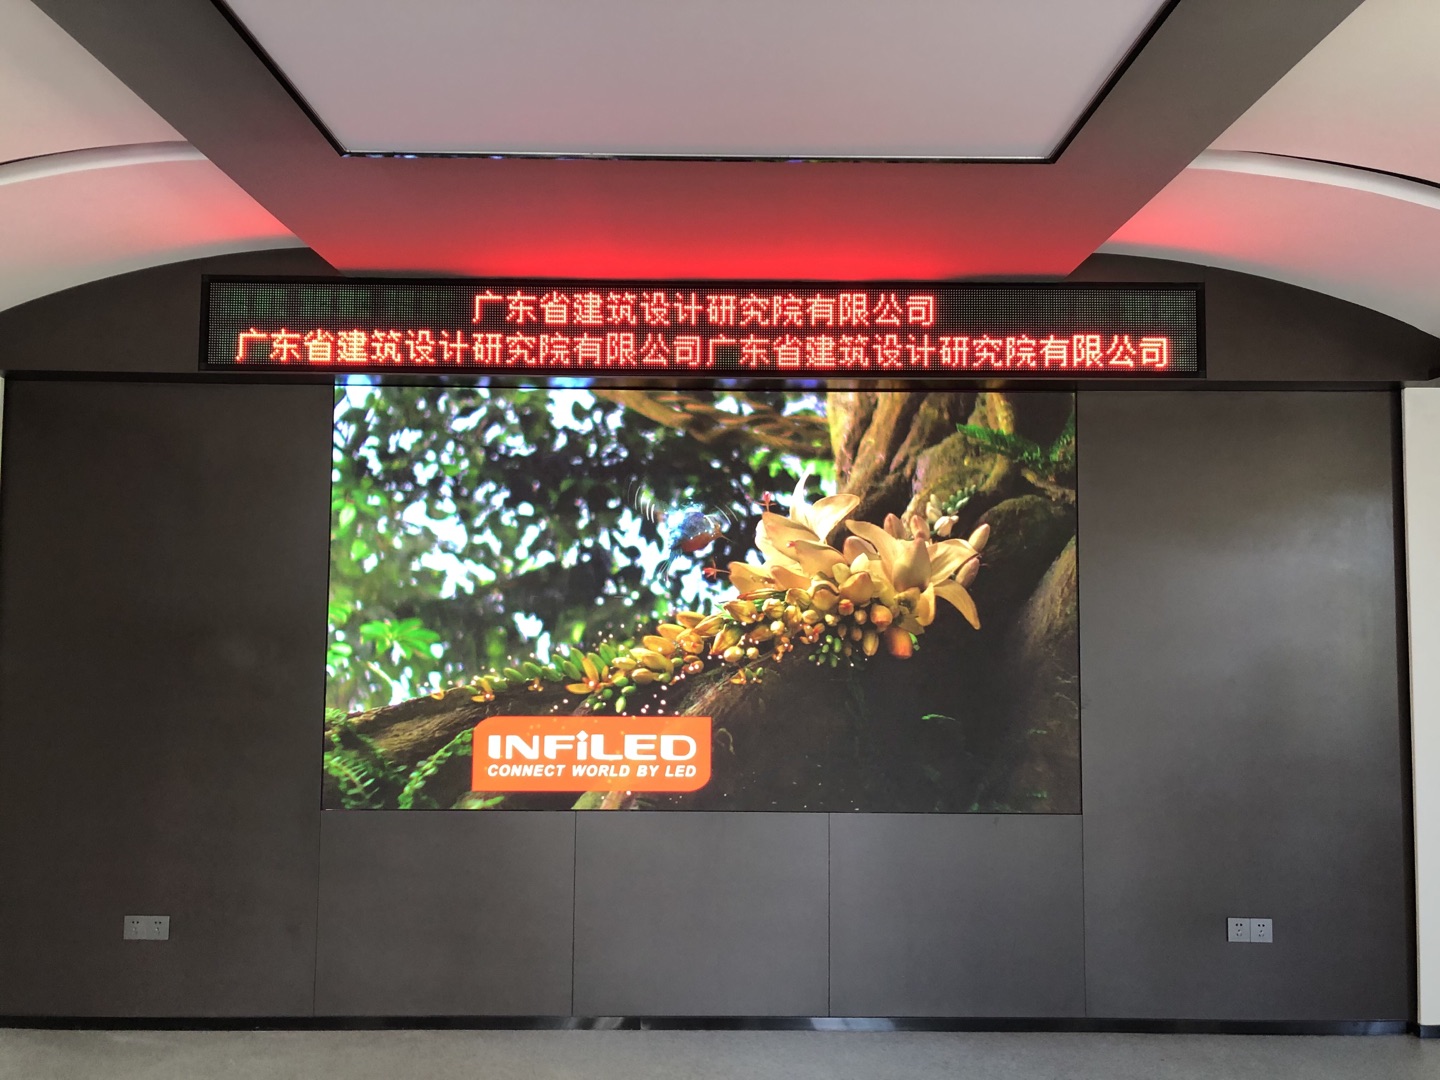 INFiLED indoor small-pitch LED screen was installed in Guangdong Architectural Design and Research Institute